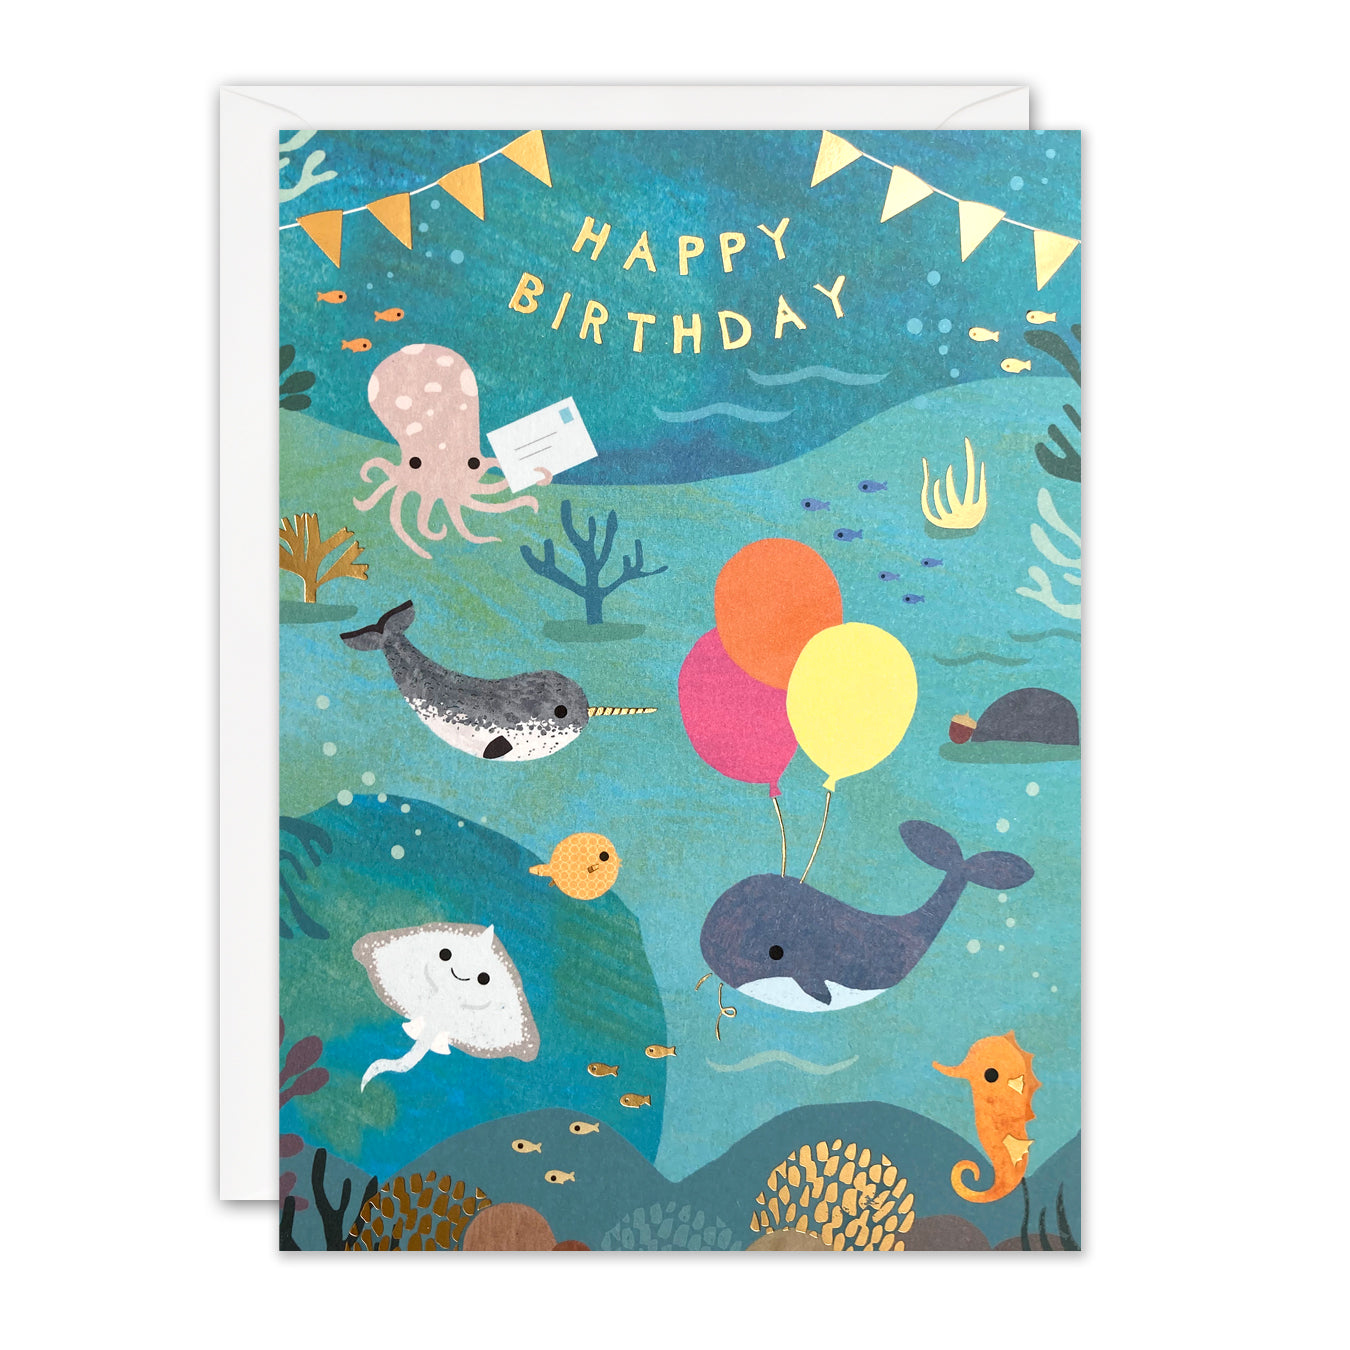 Ocean Party Children's Birthday Card from Penny Black